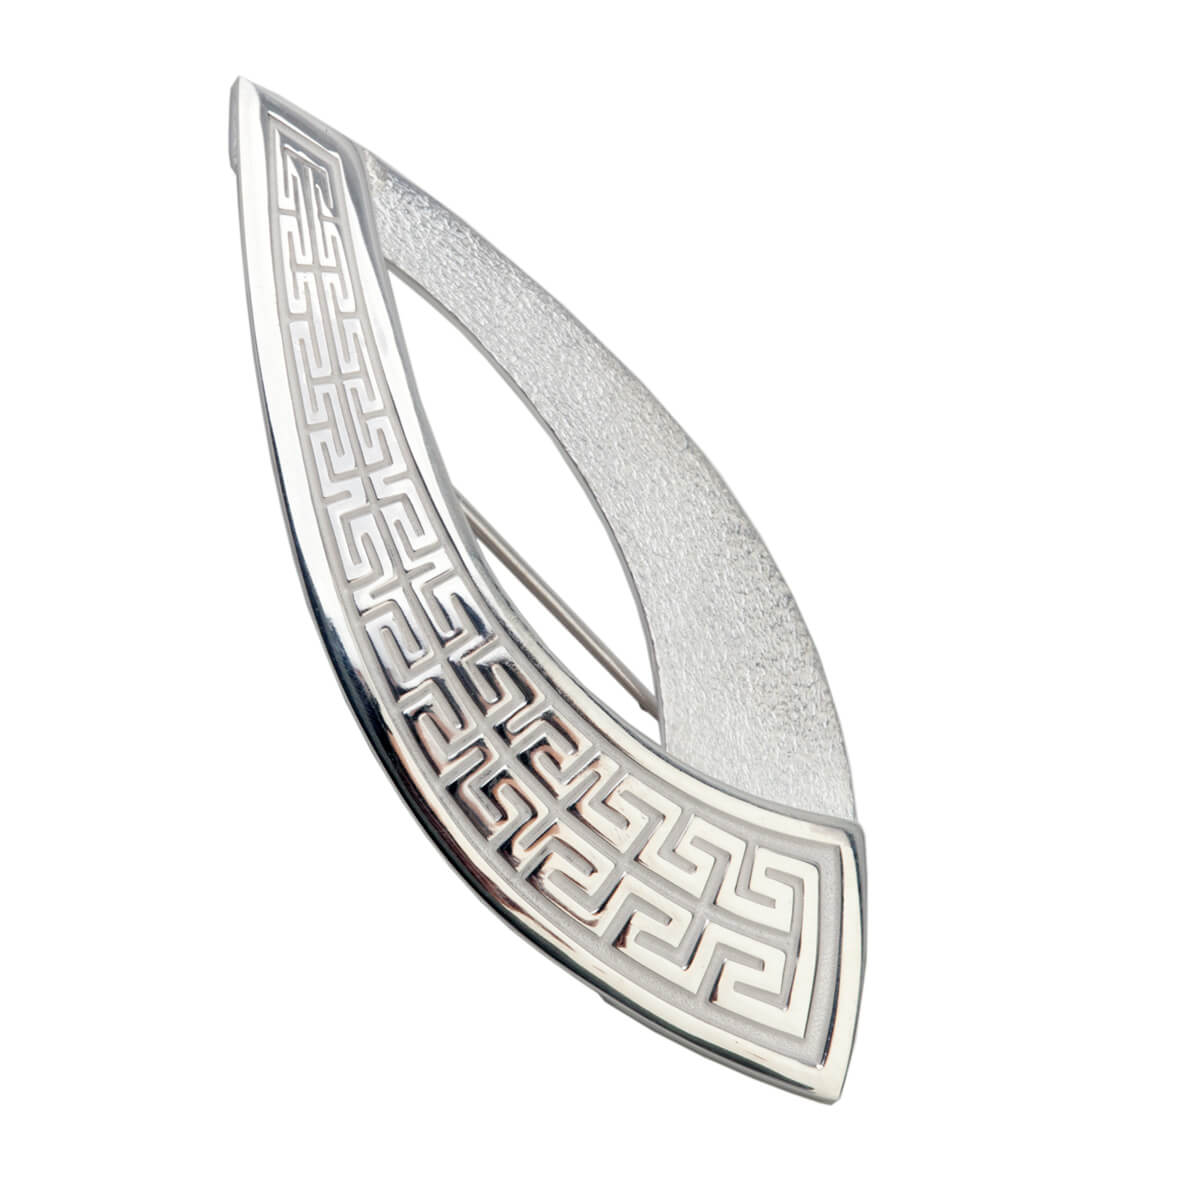 Faller Marigold Maze , pillar stone, Carndonagh, Inishowen, Co. Donegal, Greek key pattern, celtic, ancient, monastery, St, Patrick, ladies, heritage, historical, intricate carving, Christian pilgrimage, medieval, St. Columba, brooch, sterling silver